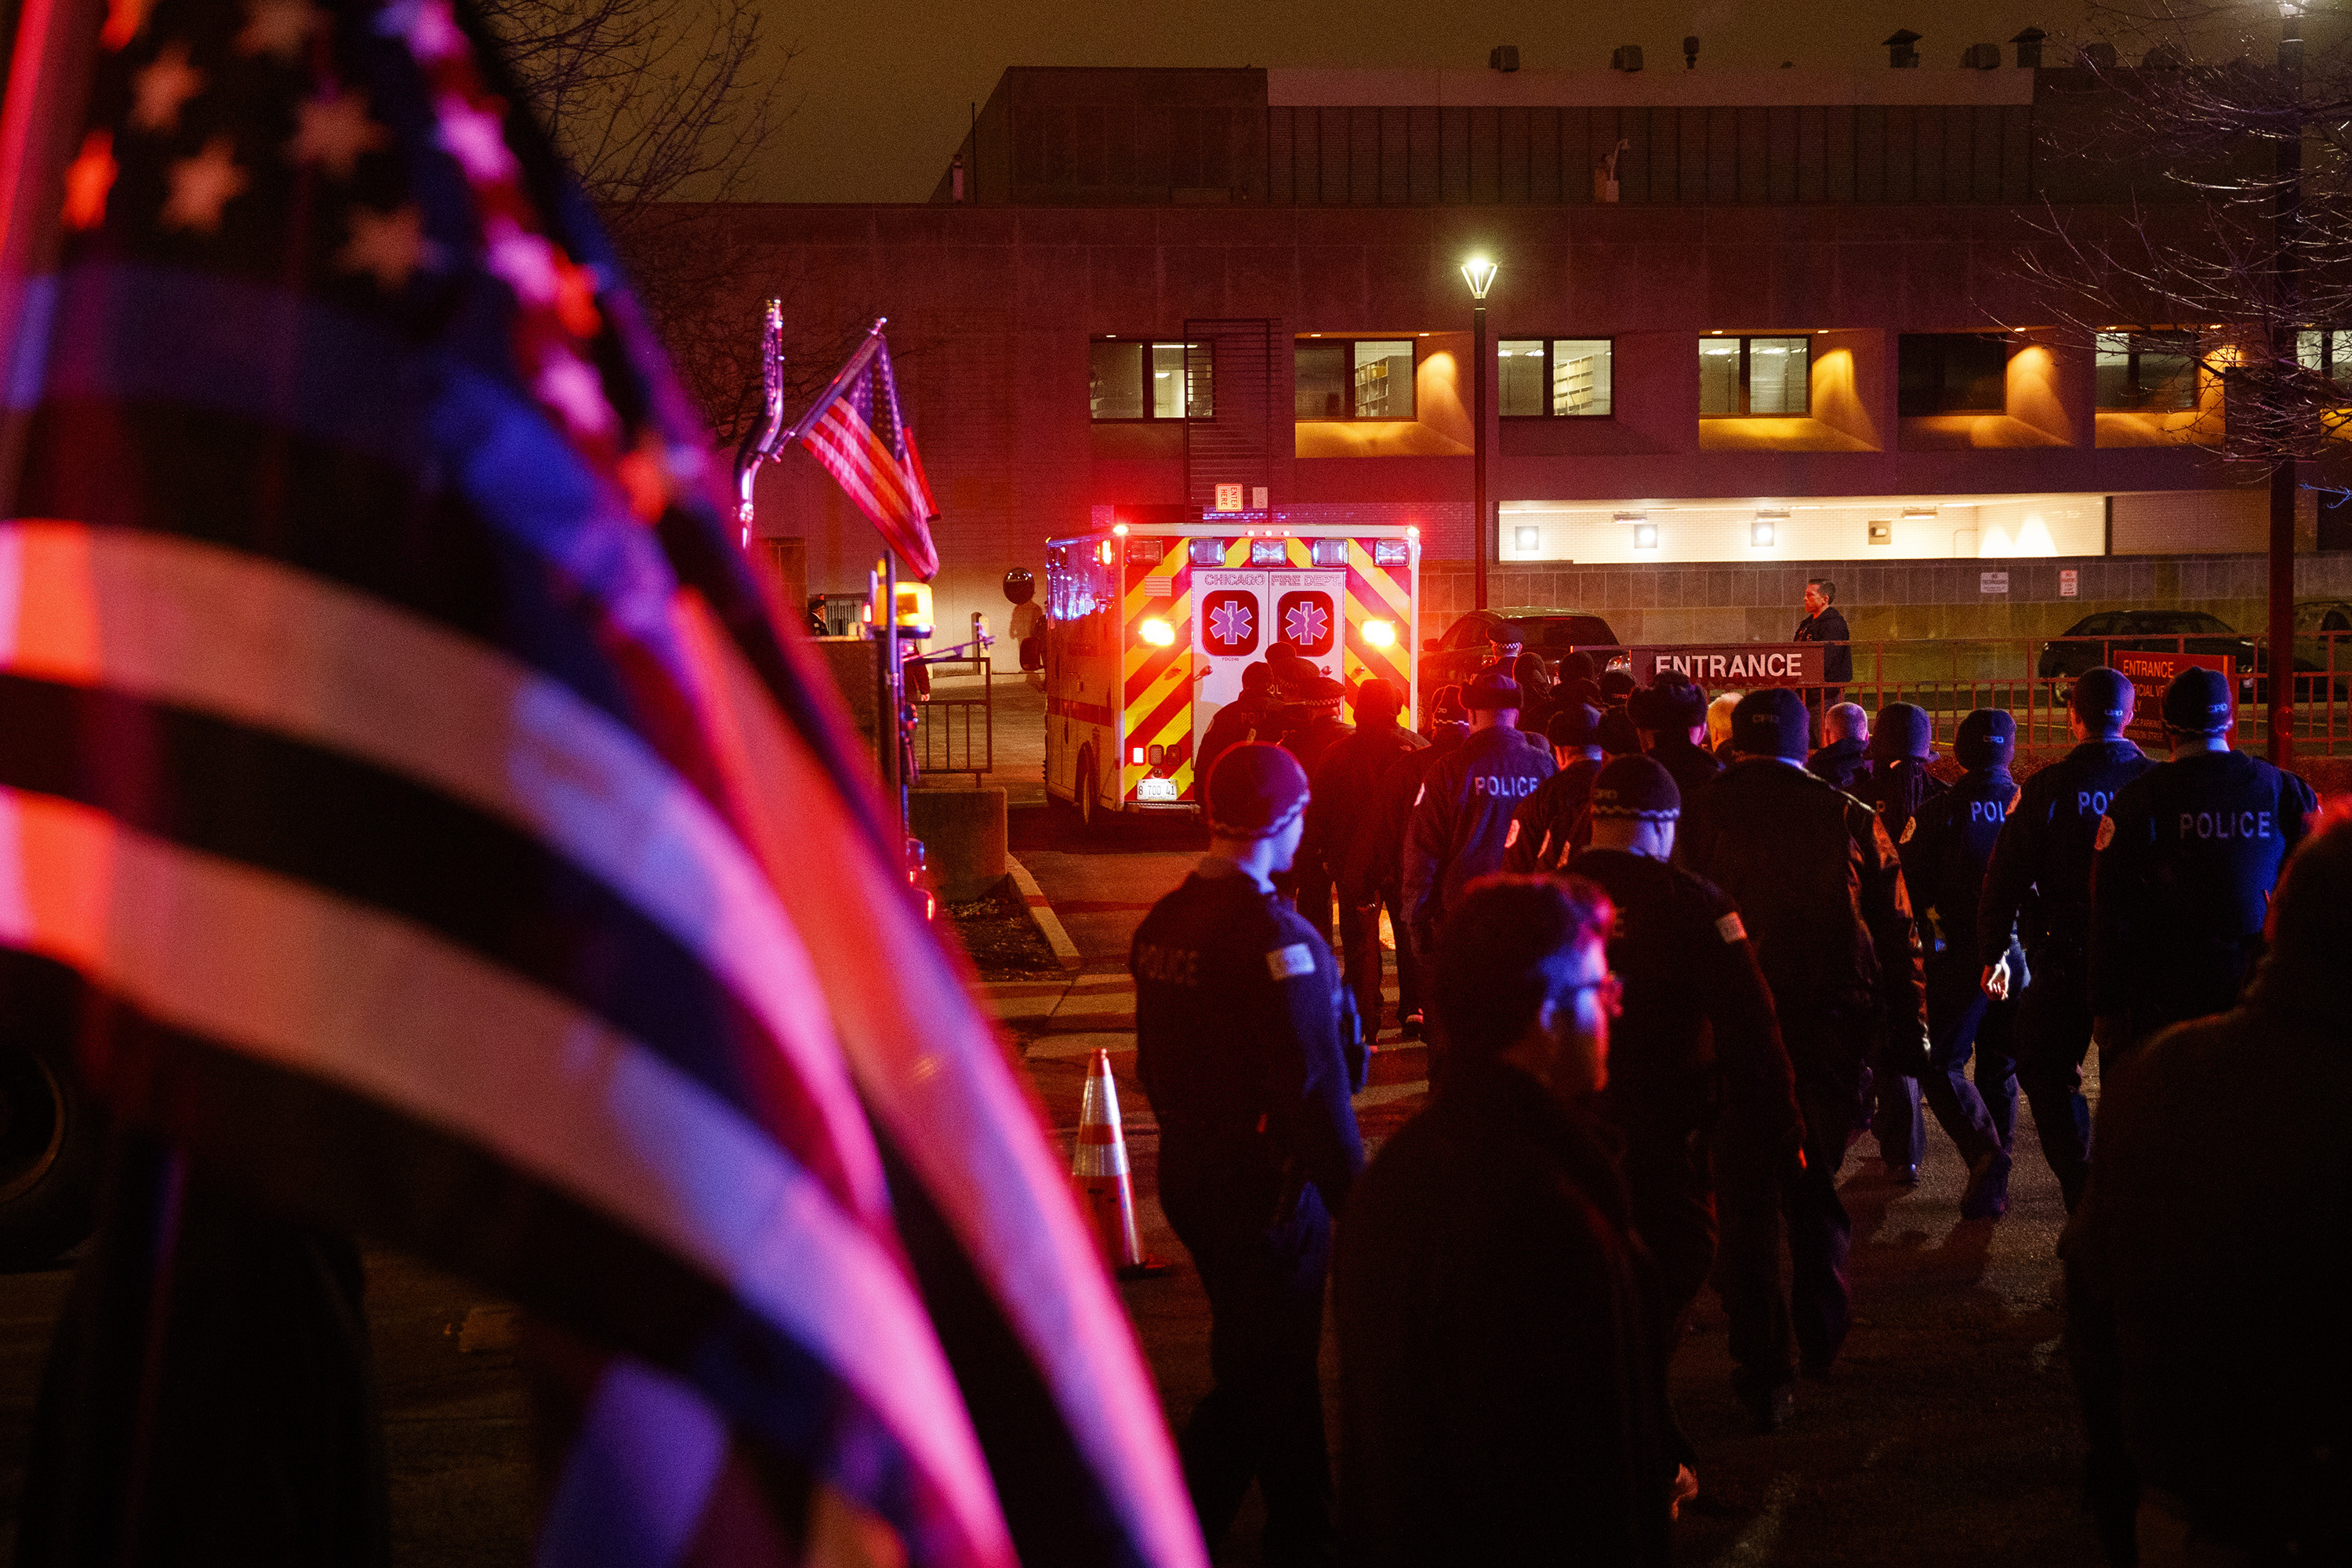 Officers follow an ambulance as it arrives at the medical examiners office carrying the body of a police officer who was killed during a shooting at Mercy Hospital which left four people, including the gunman, dead Monday Nov. 19, 2018 in Chicago. (Armando L. Sanchez/Chicago Tribune/TNS via Getty Images) (Chicago Tribune&mdash;TNS via Getty Images)